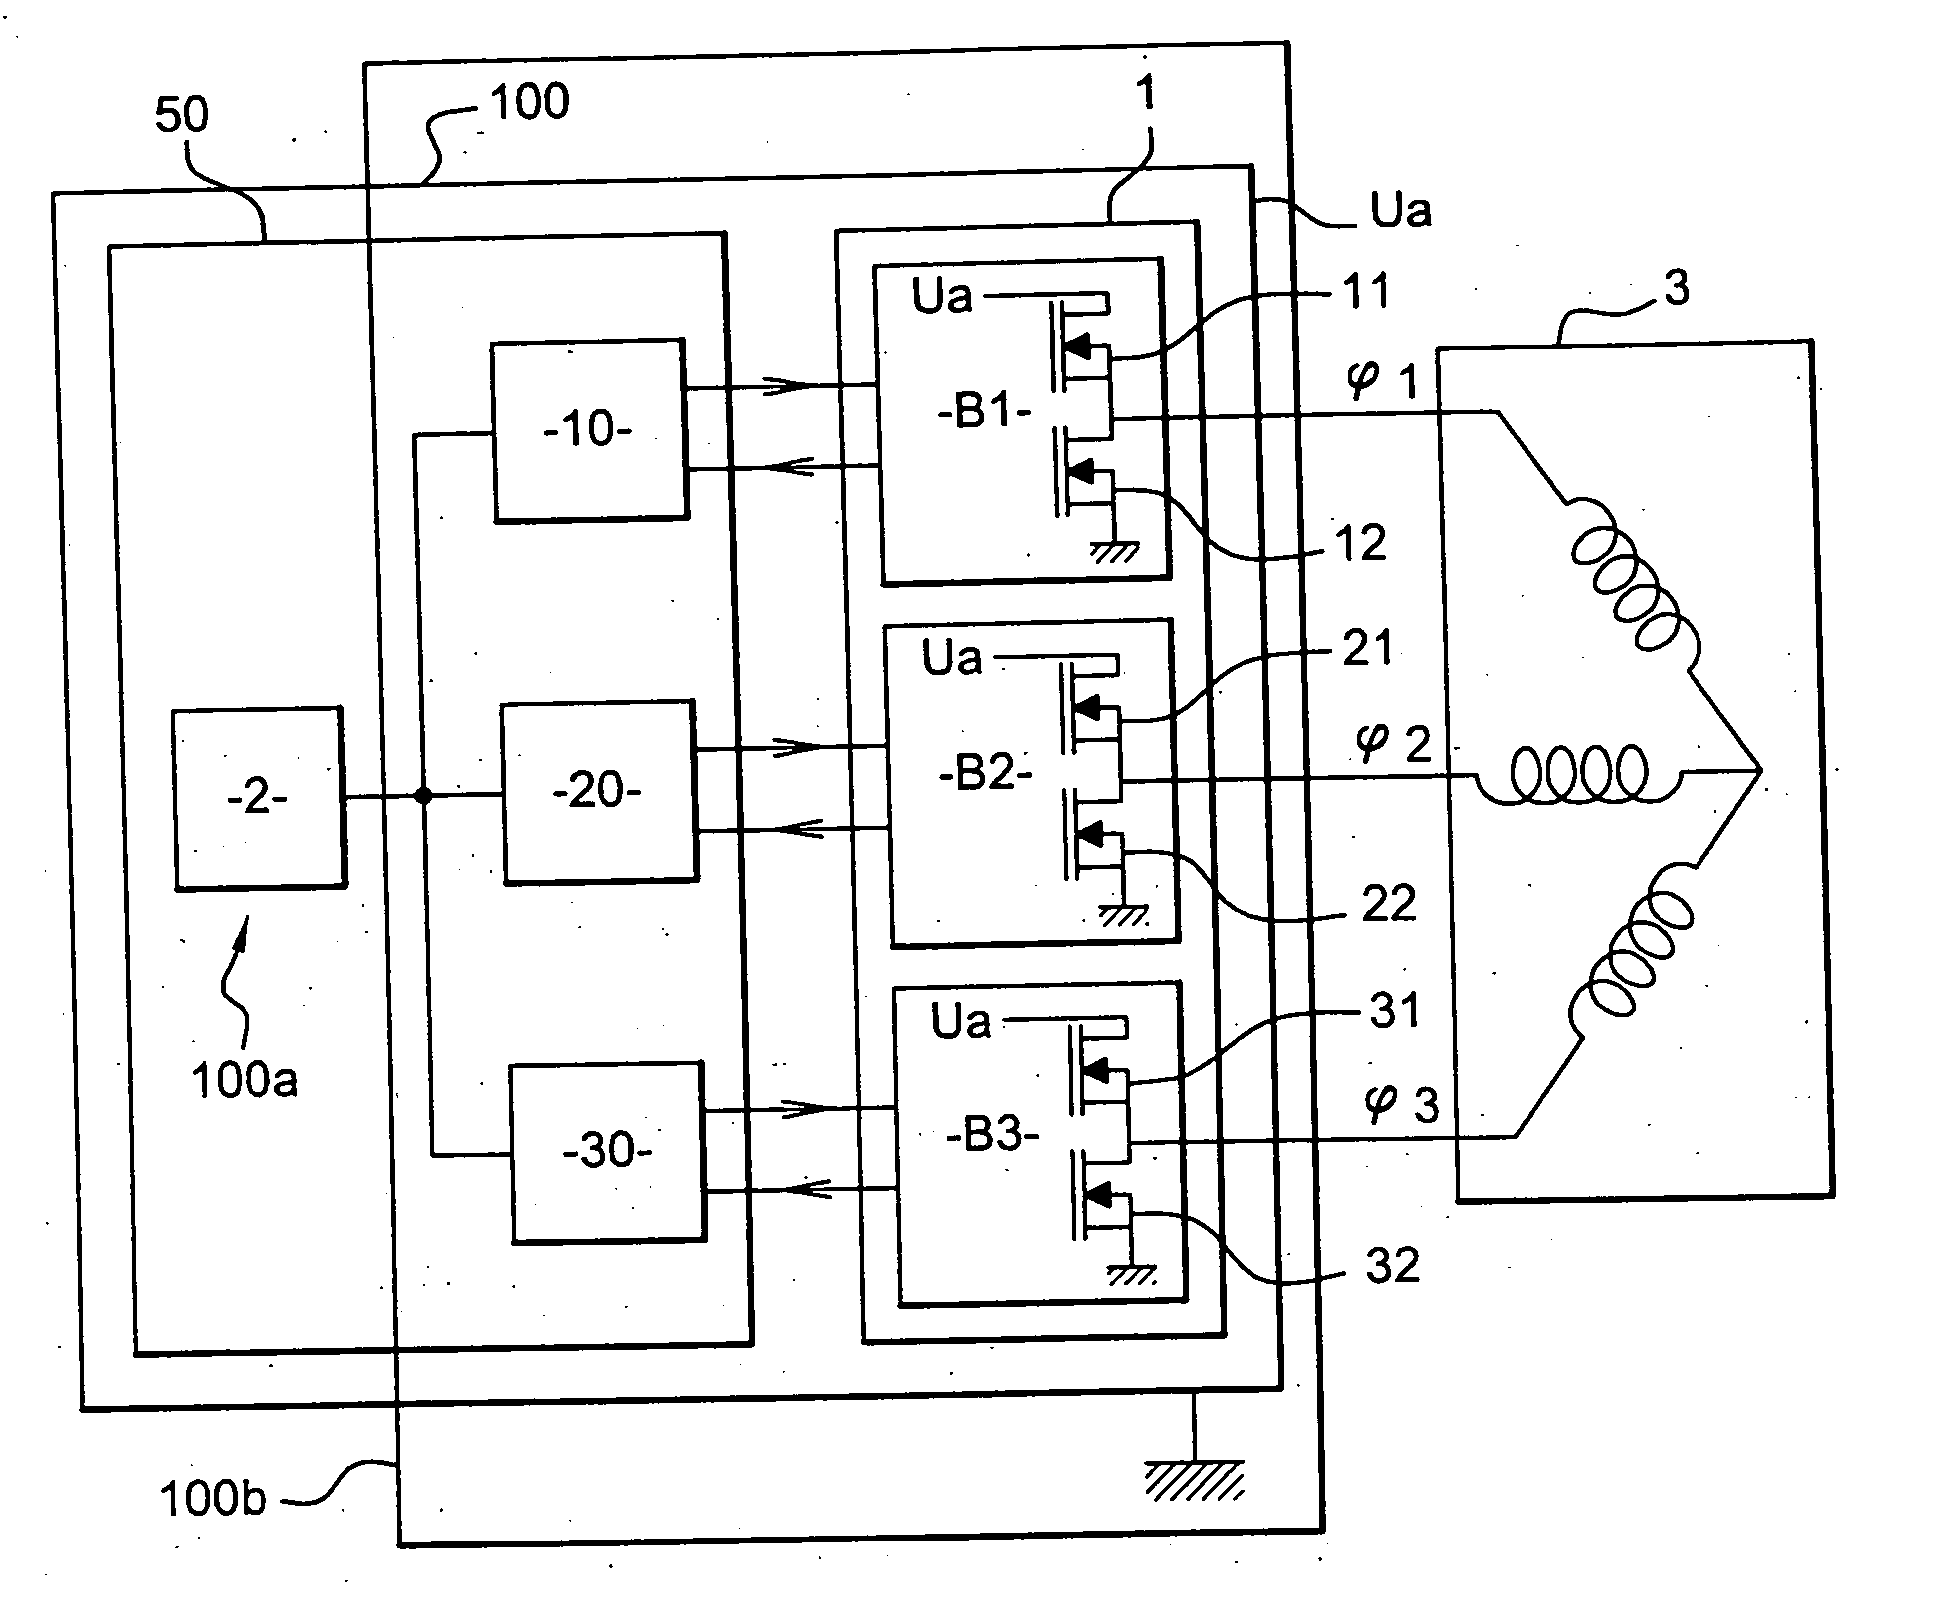 Control and power module for integreated alternator-starter